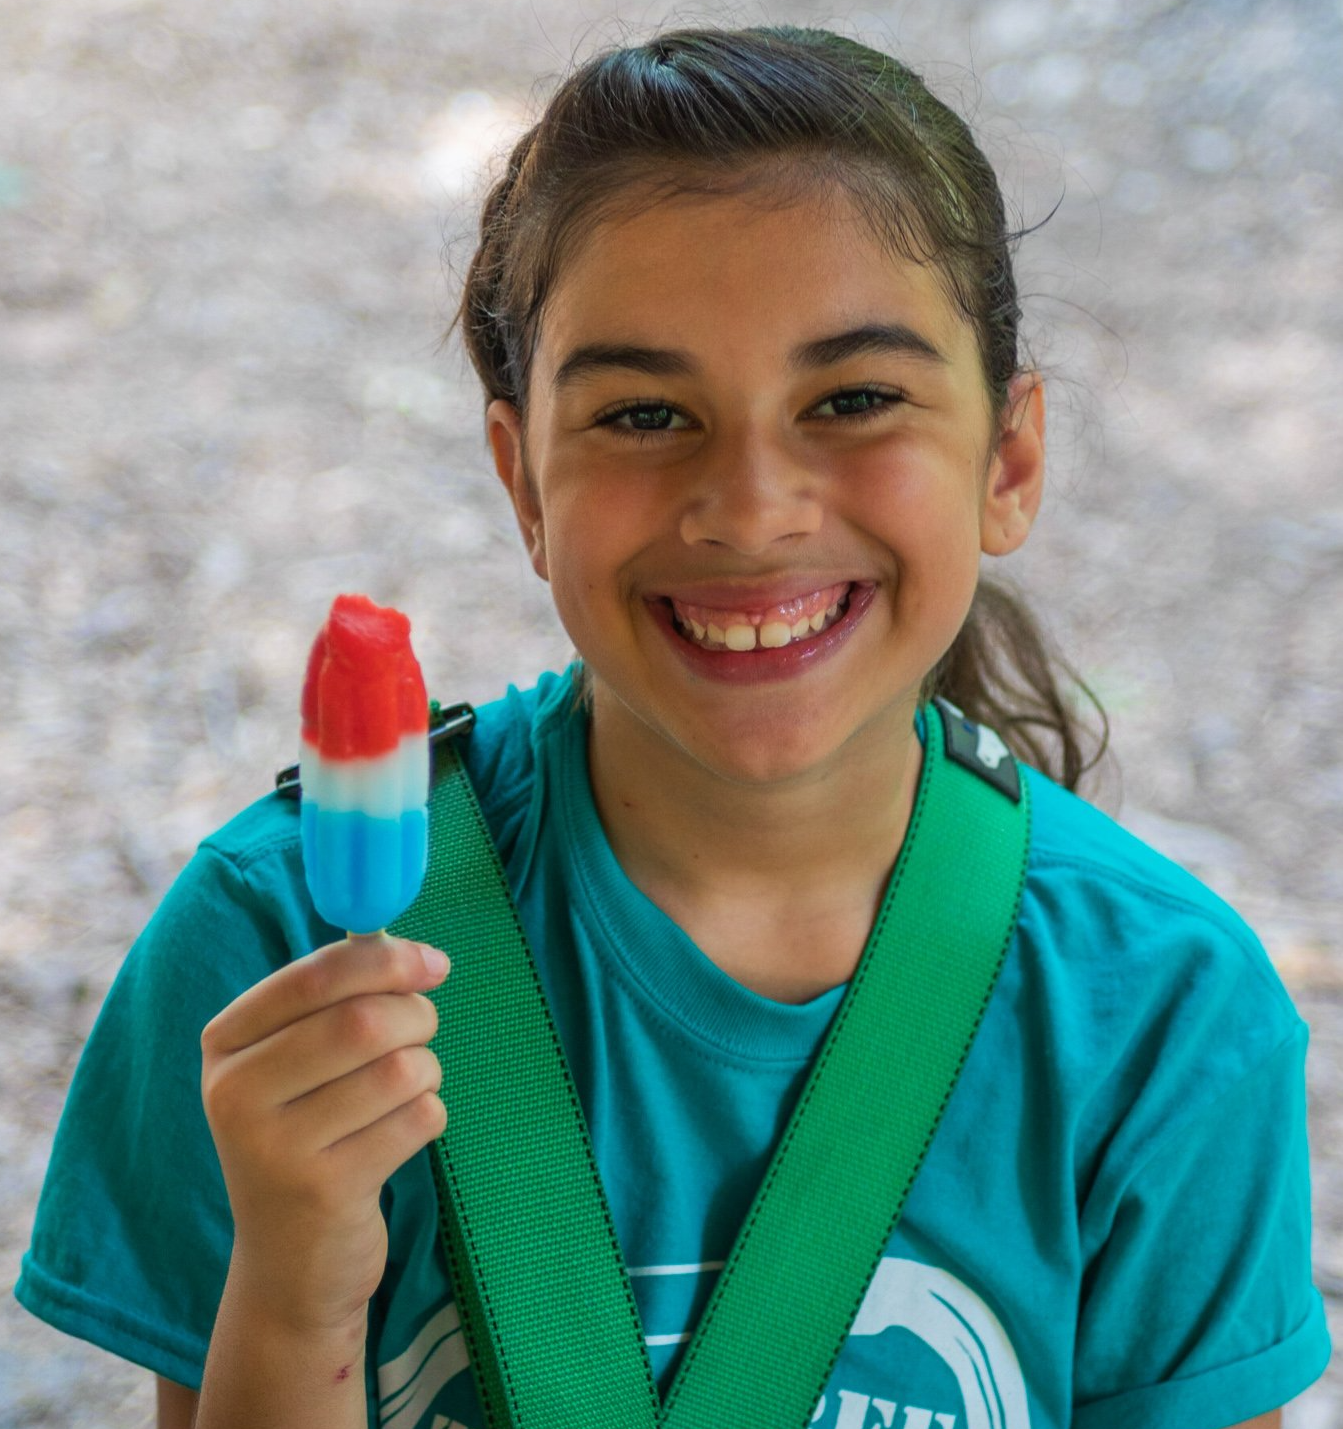 Young camper enjoying a popsicle